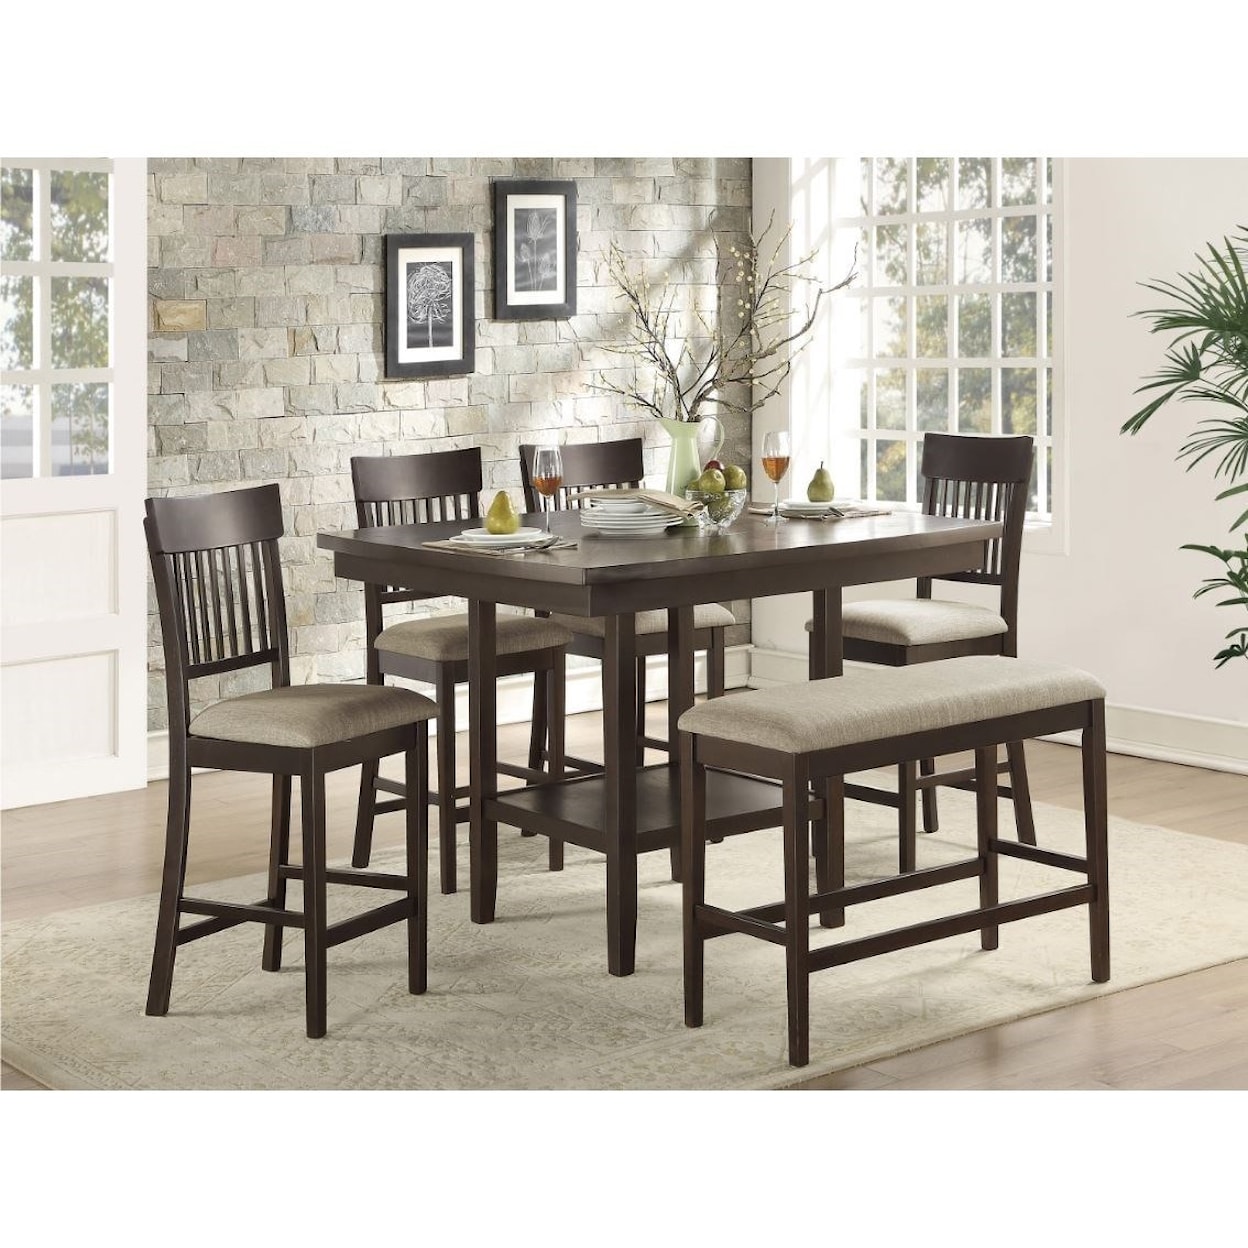 Homelegance Balin 6-Piece Counter Height Table and Chair Set